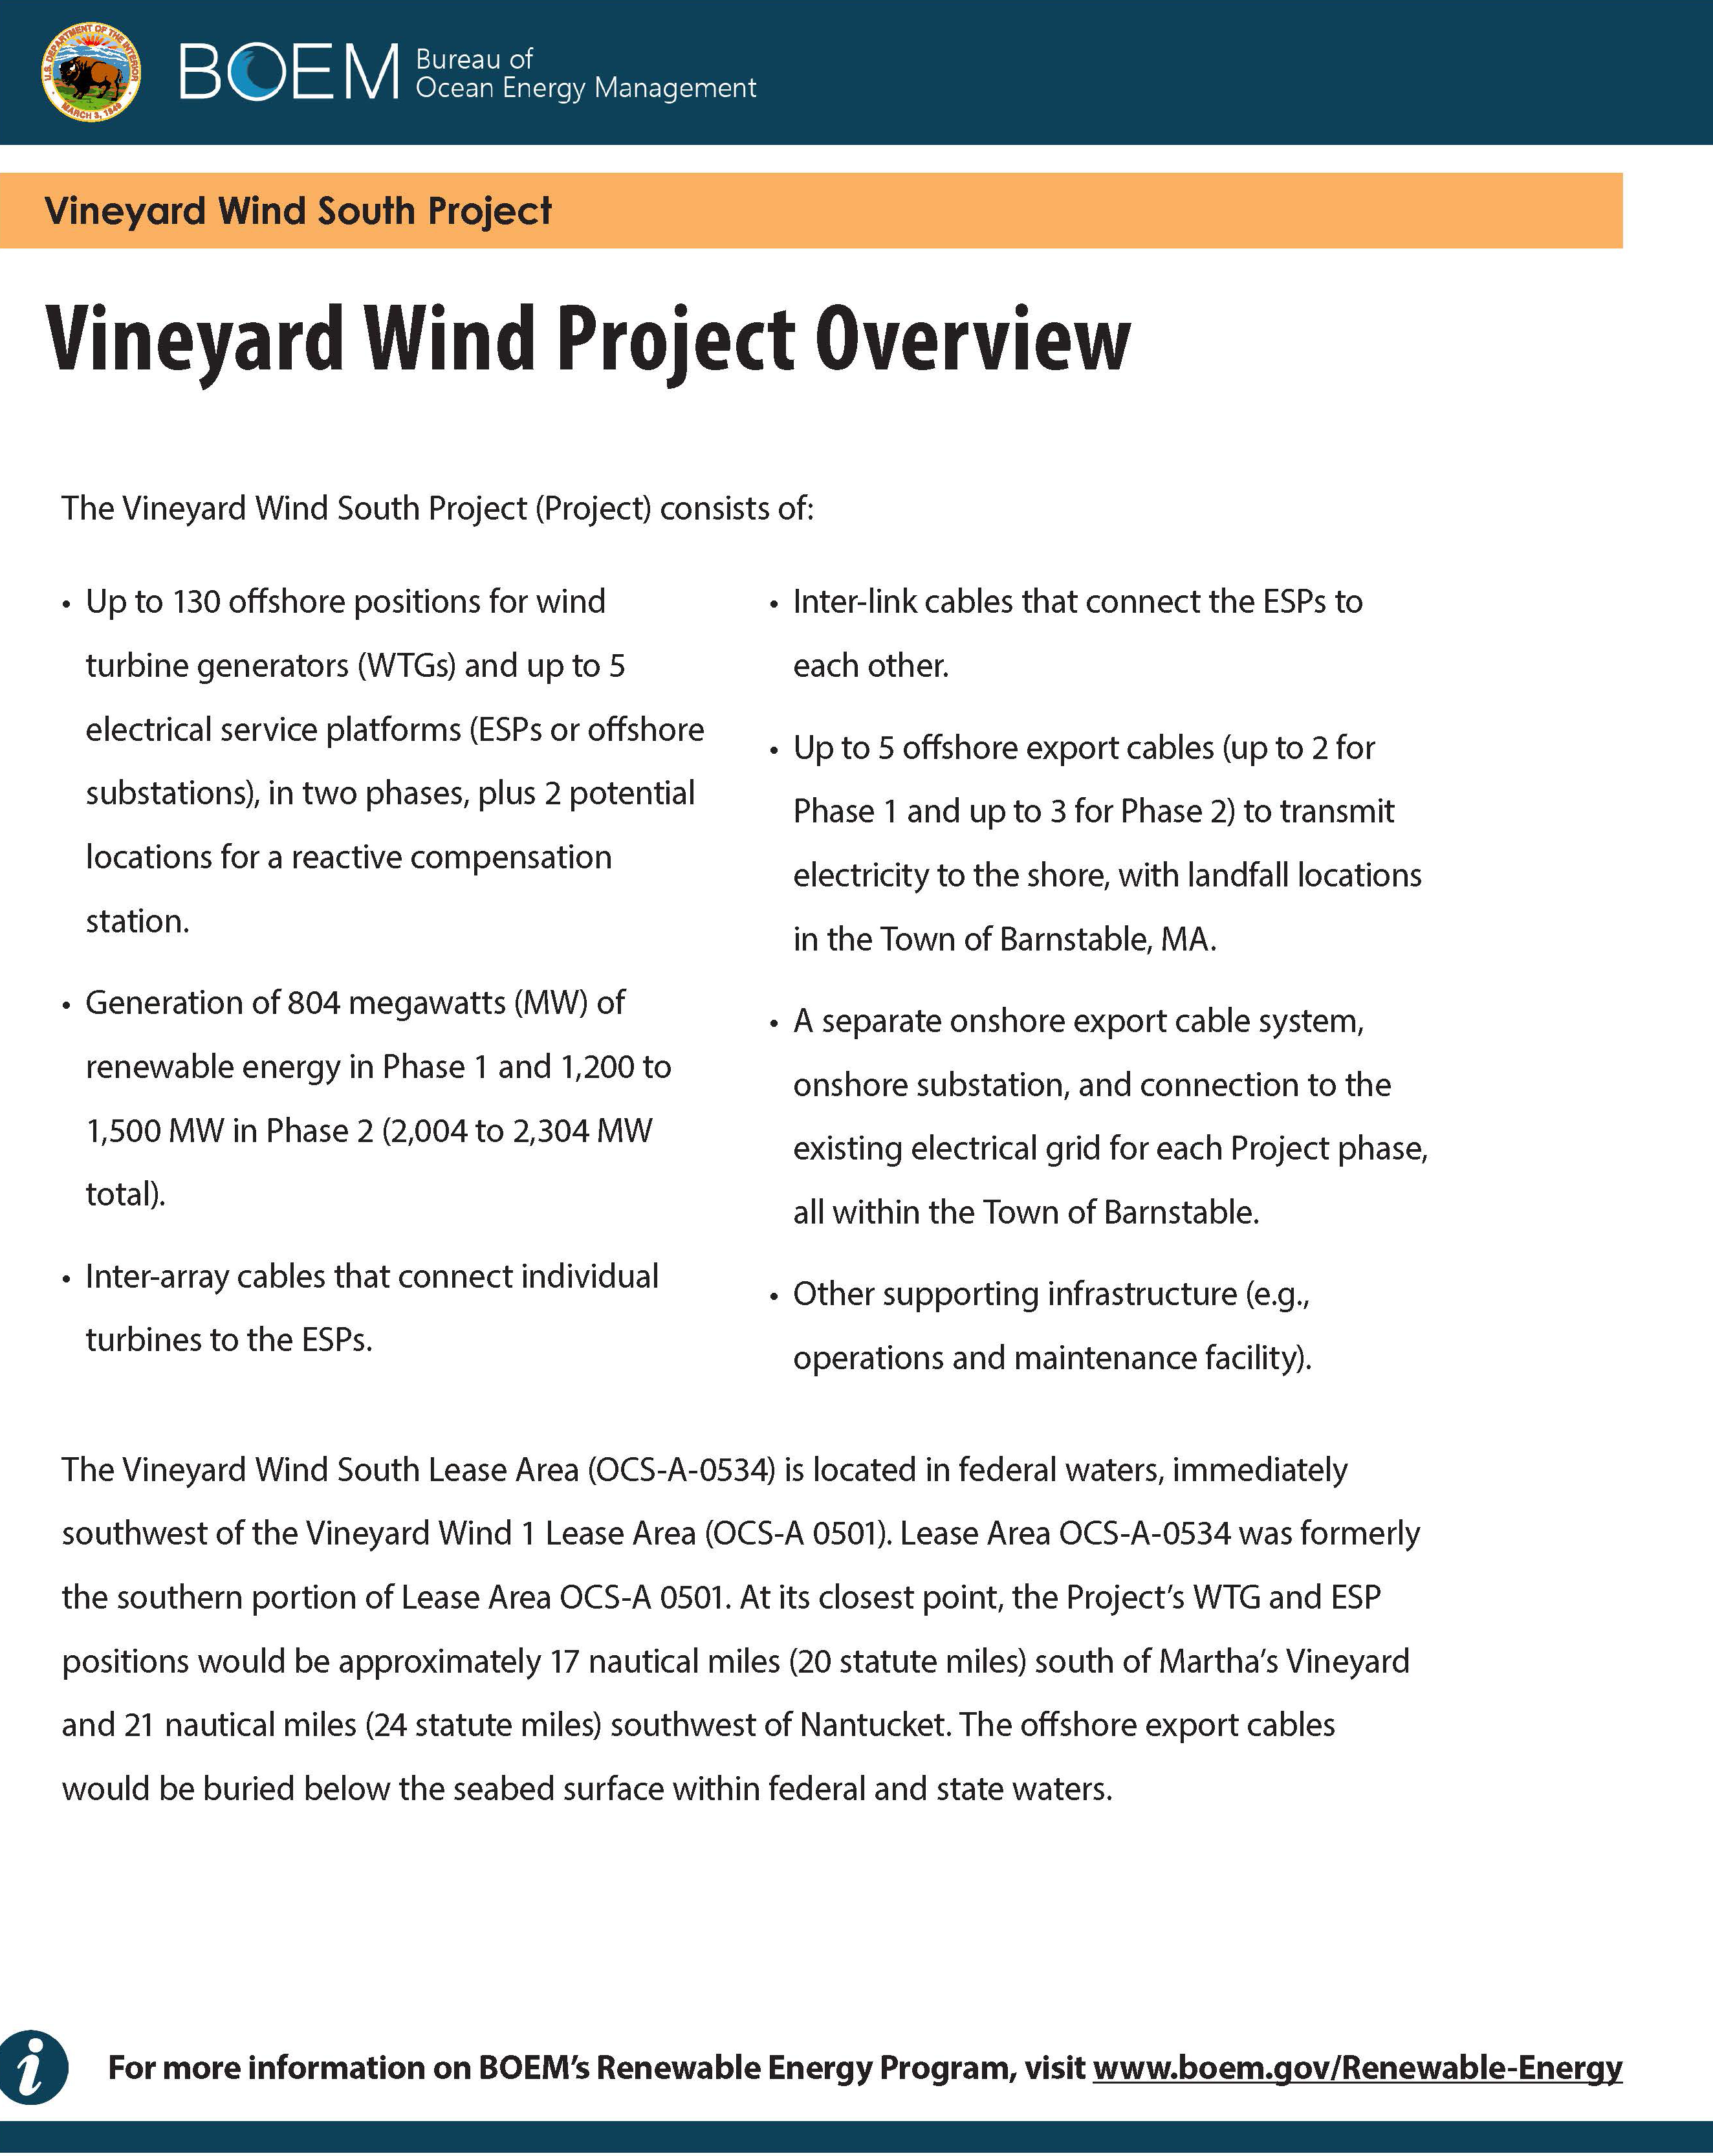 Vineyard Wind South Overview